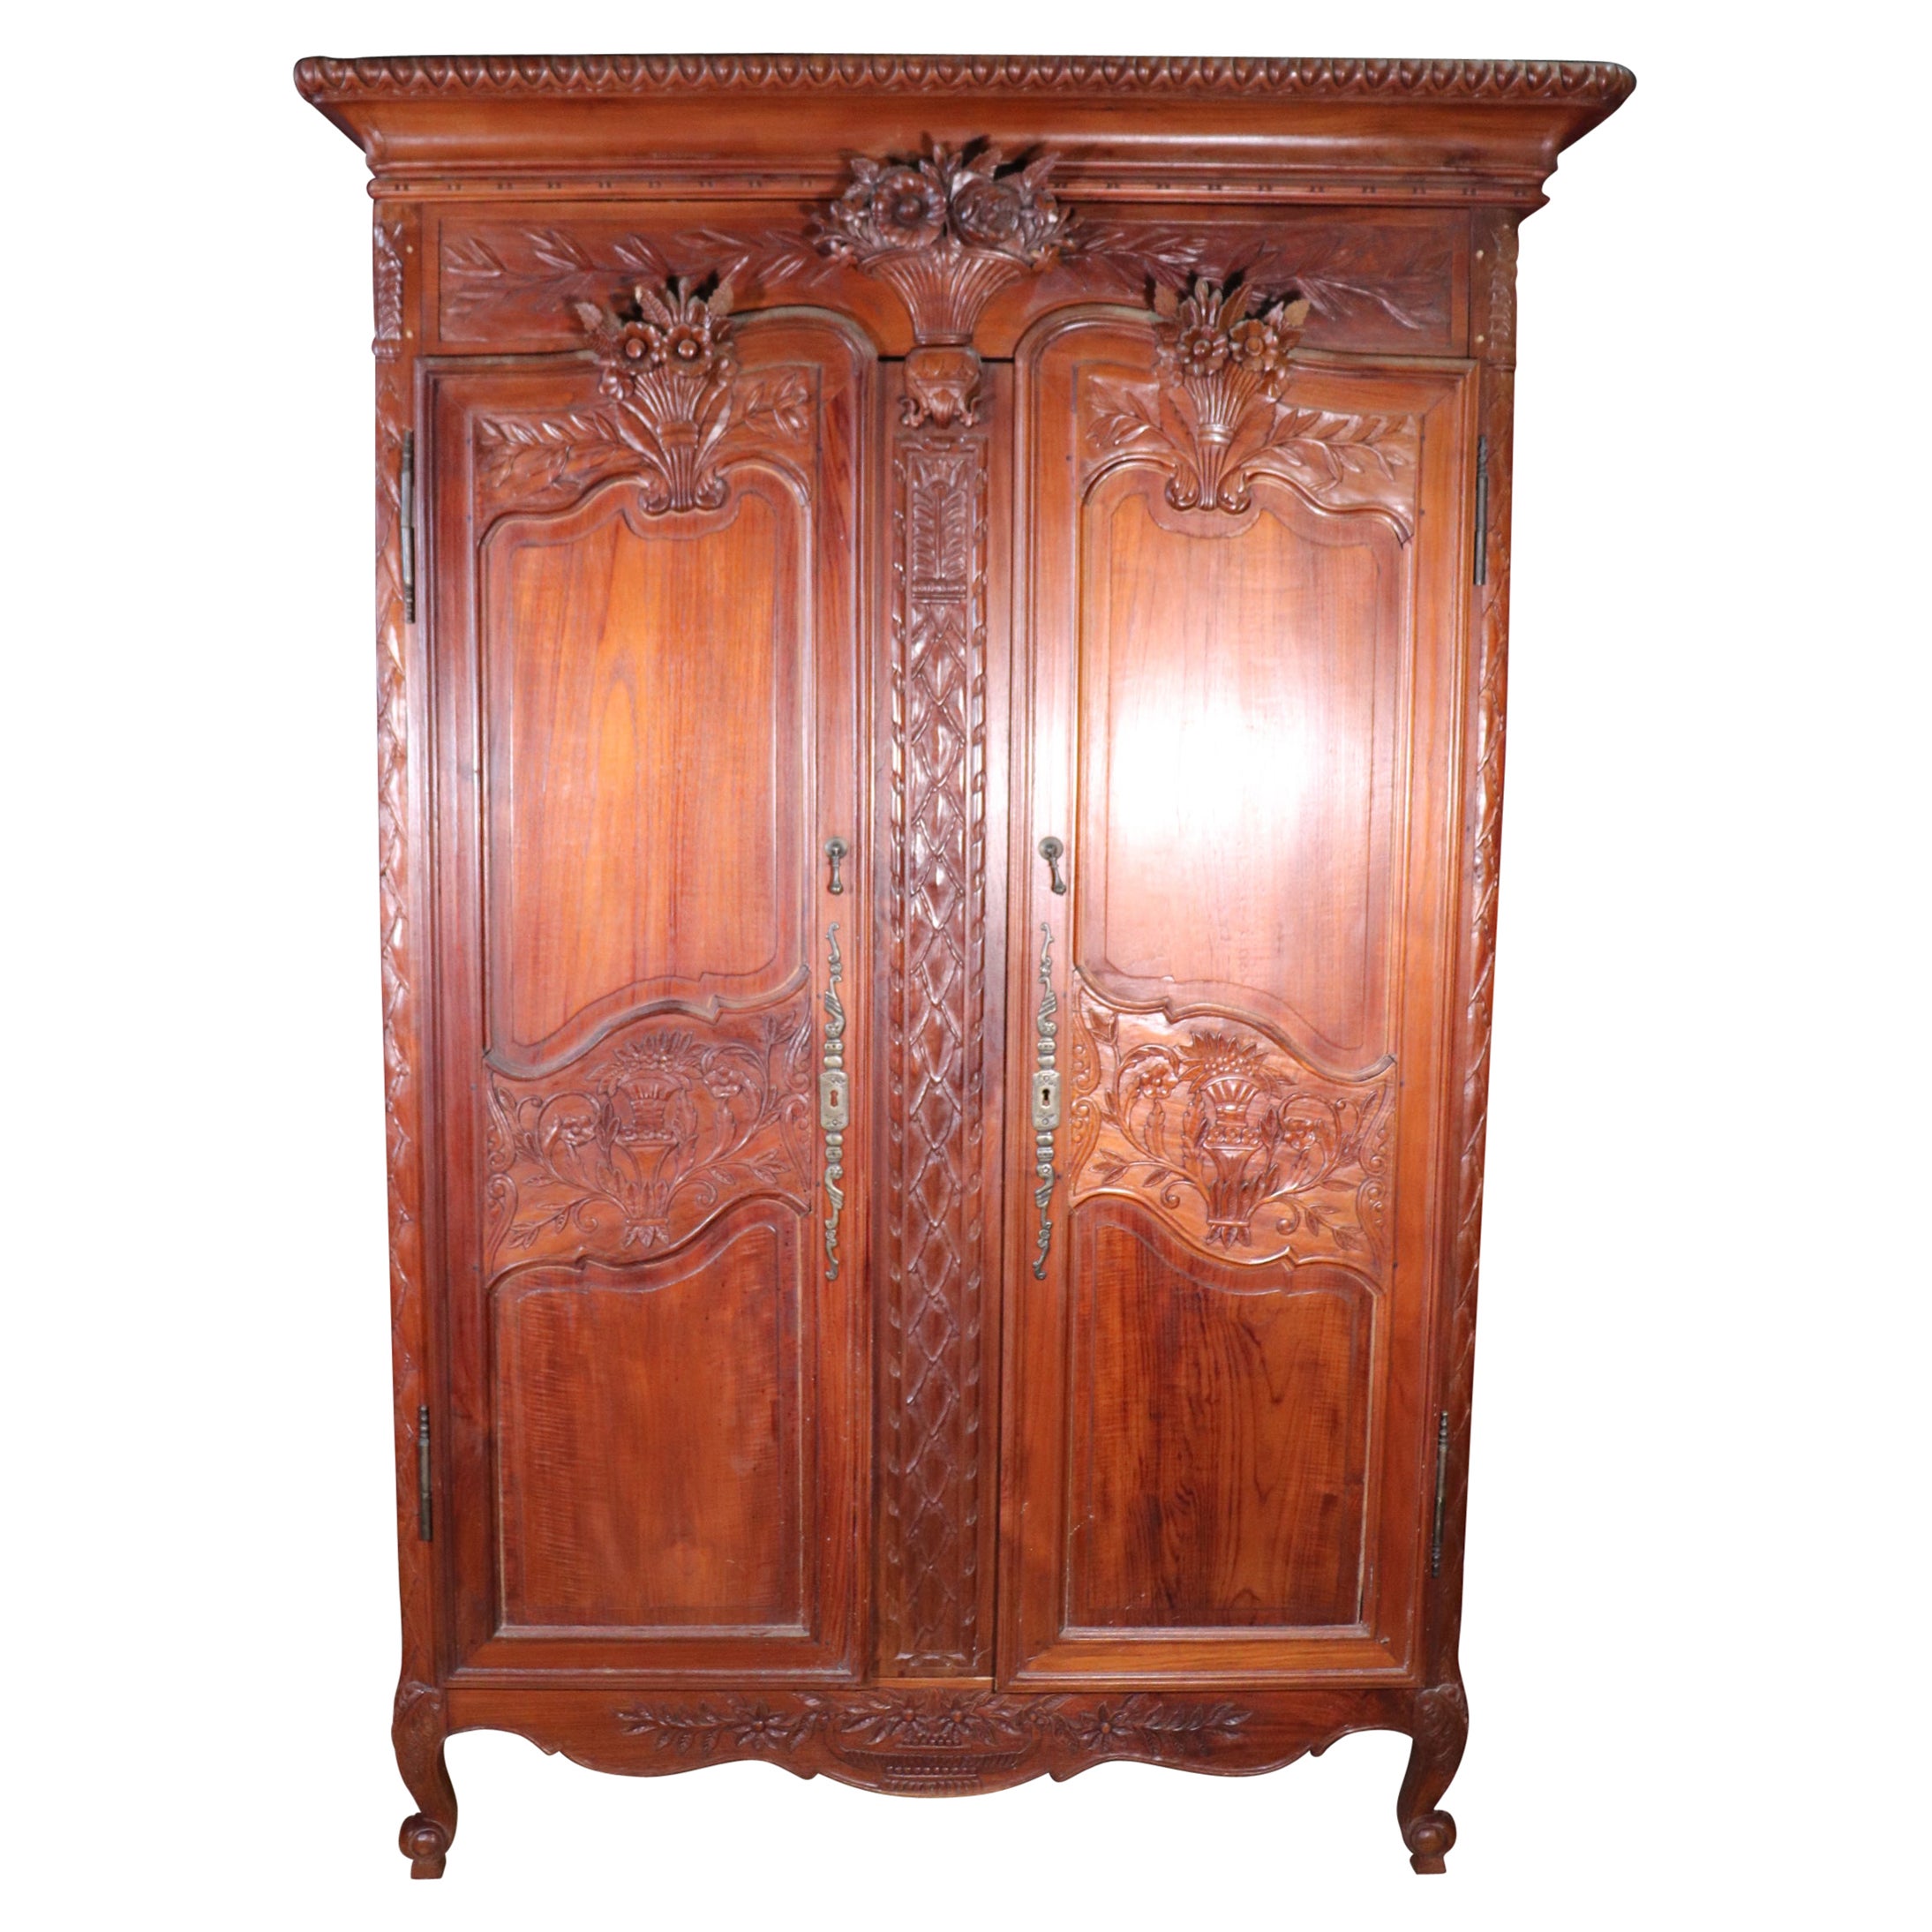 Carved French Country Louis XV Solid Teak Armoire Wardrobe